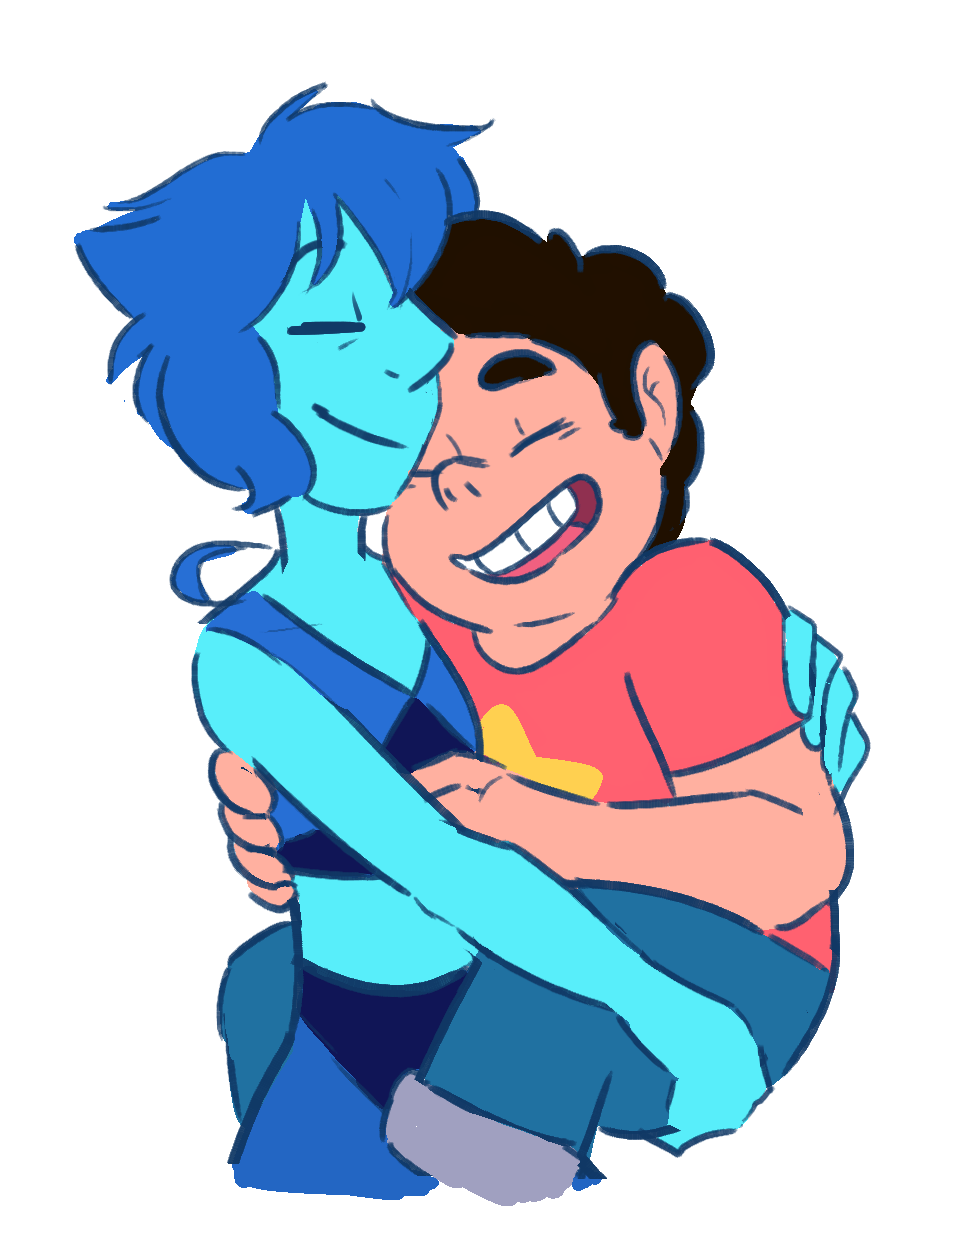 lapis’ new favorite method for keeping steven safe at all times: never putting him down